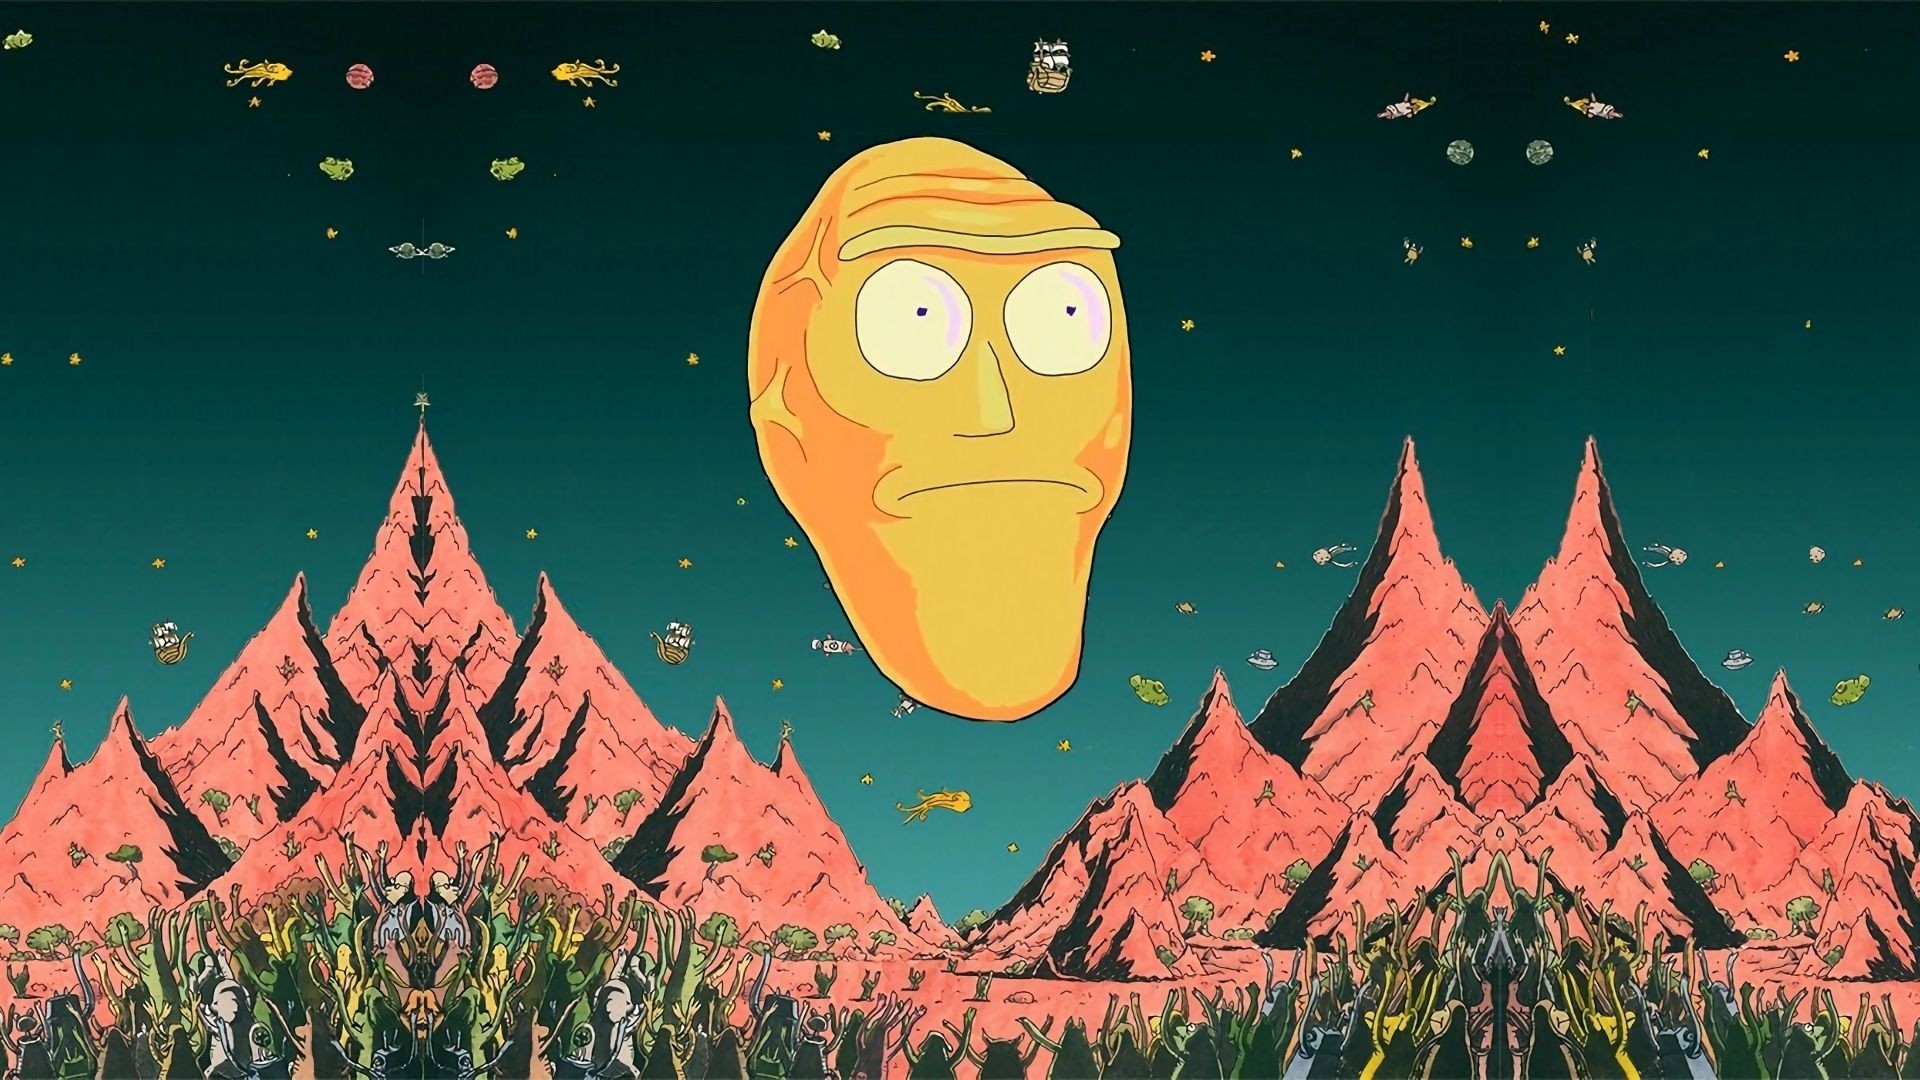 1920x1080 Title : rick and morty wallpaper giant heads – live wallpaper hd | rick.  Dimension : 1920 x 1080. File Type : JPG/JPEG